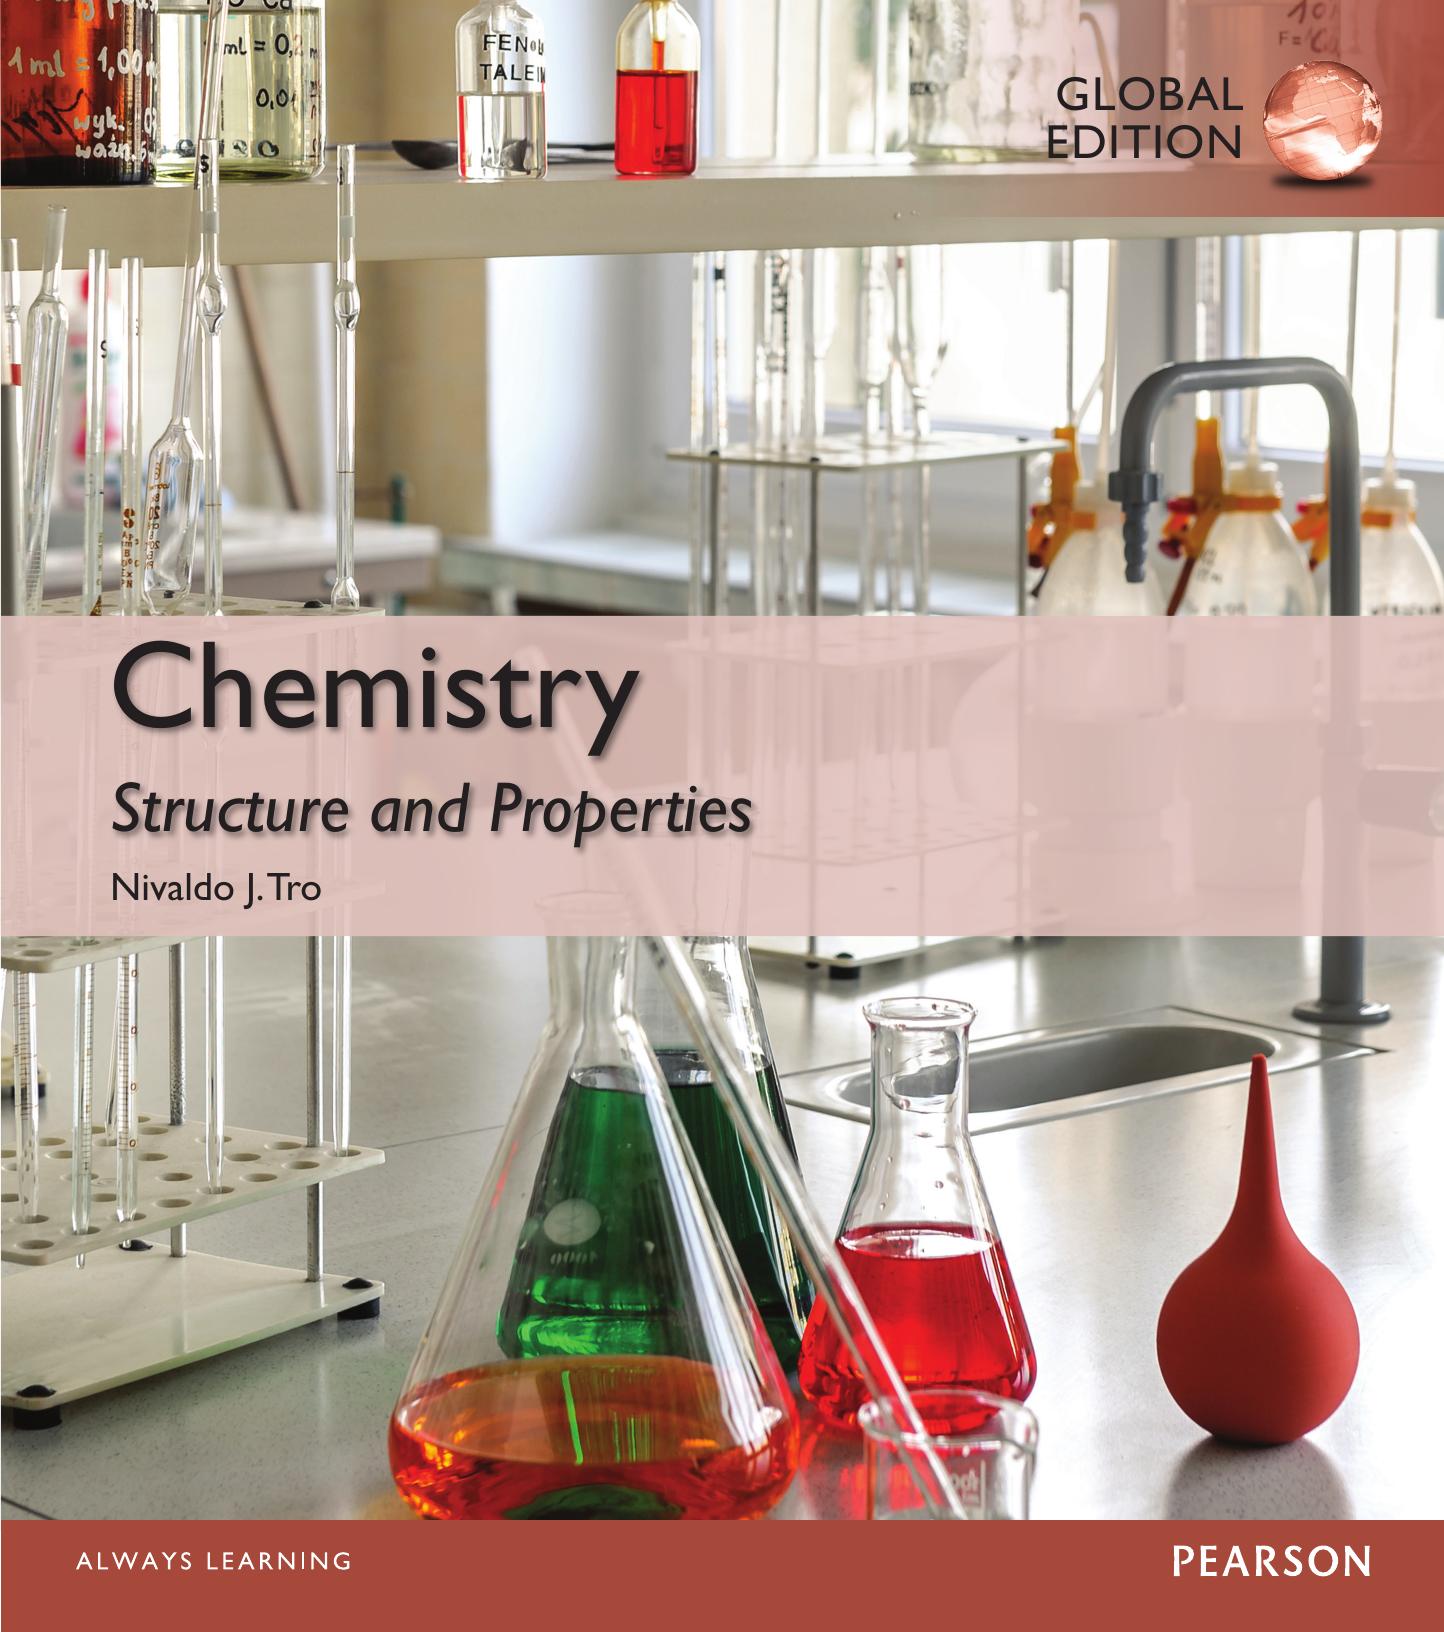 Chemistry Structure and Properties, 1st Global Edition.jpg